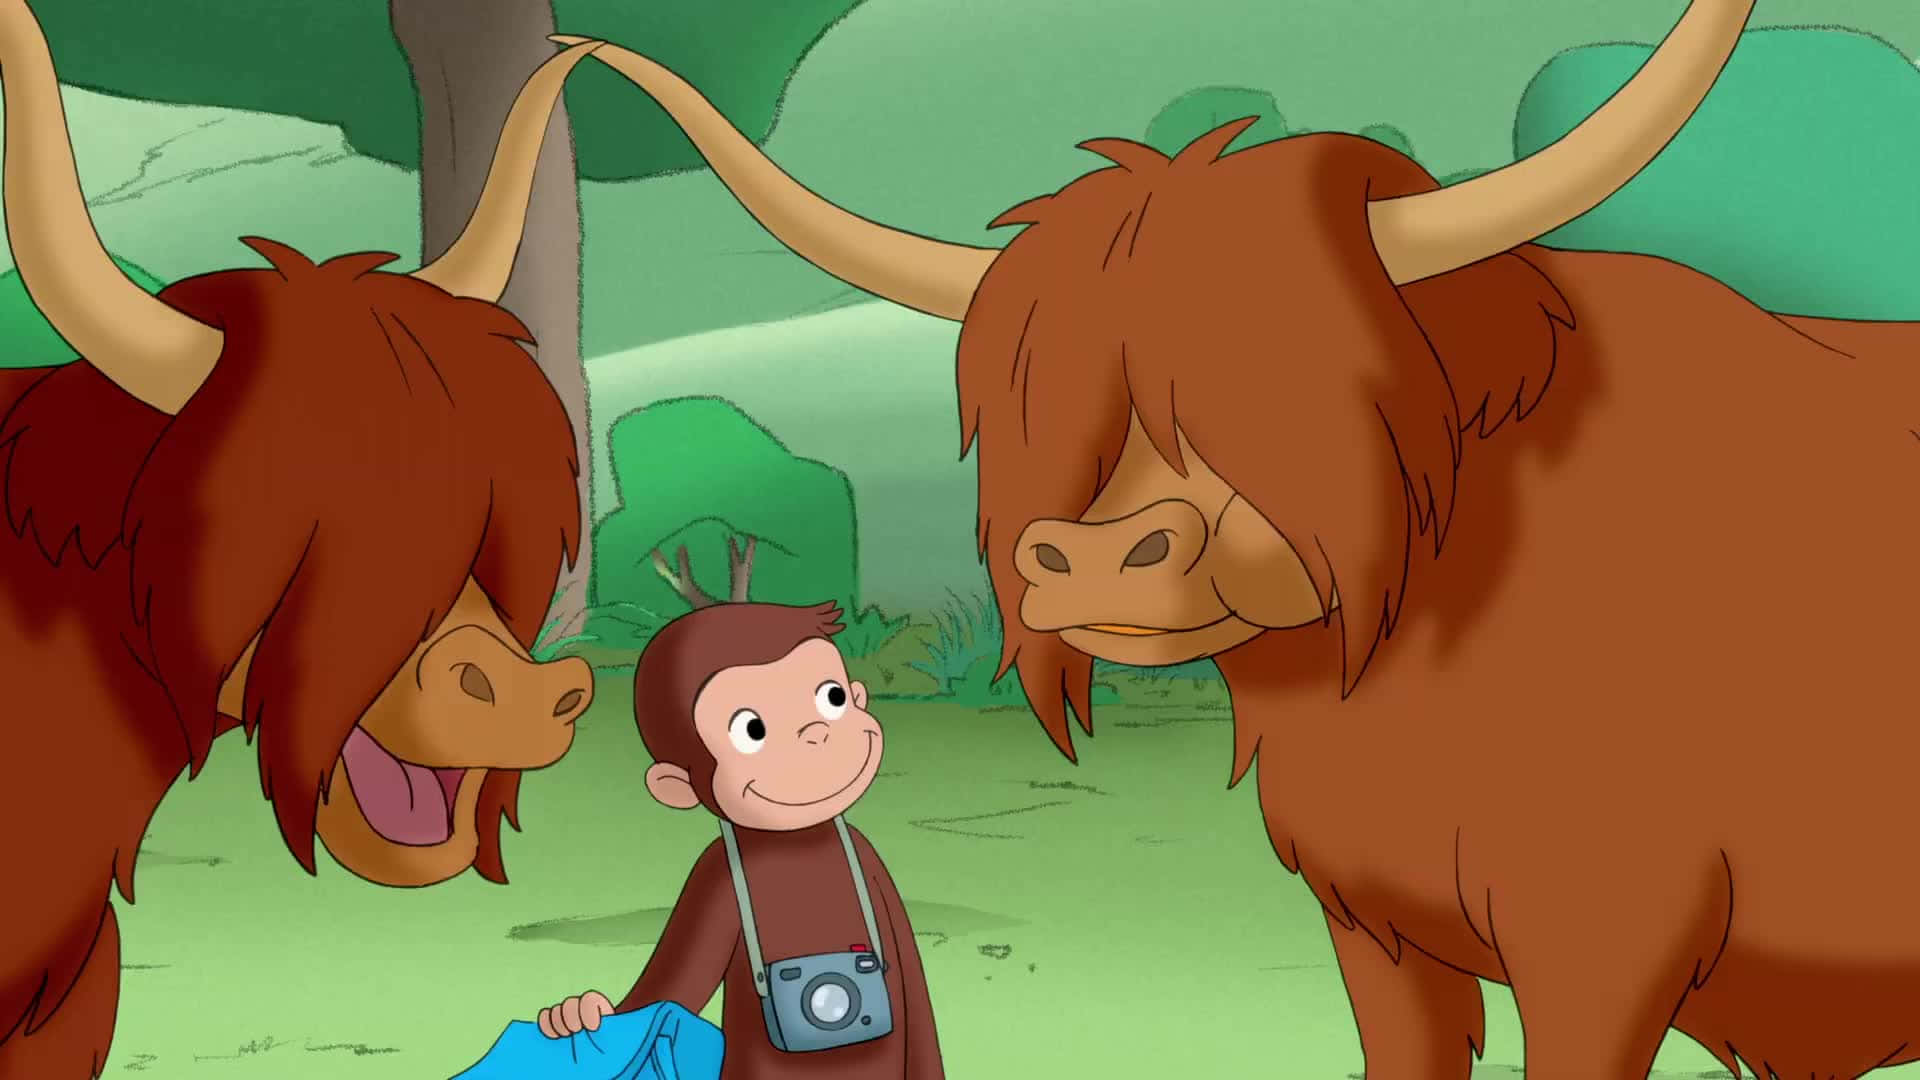 "Curious George always has a mischievous look in his eye!"